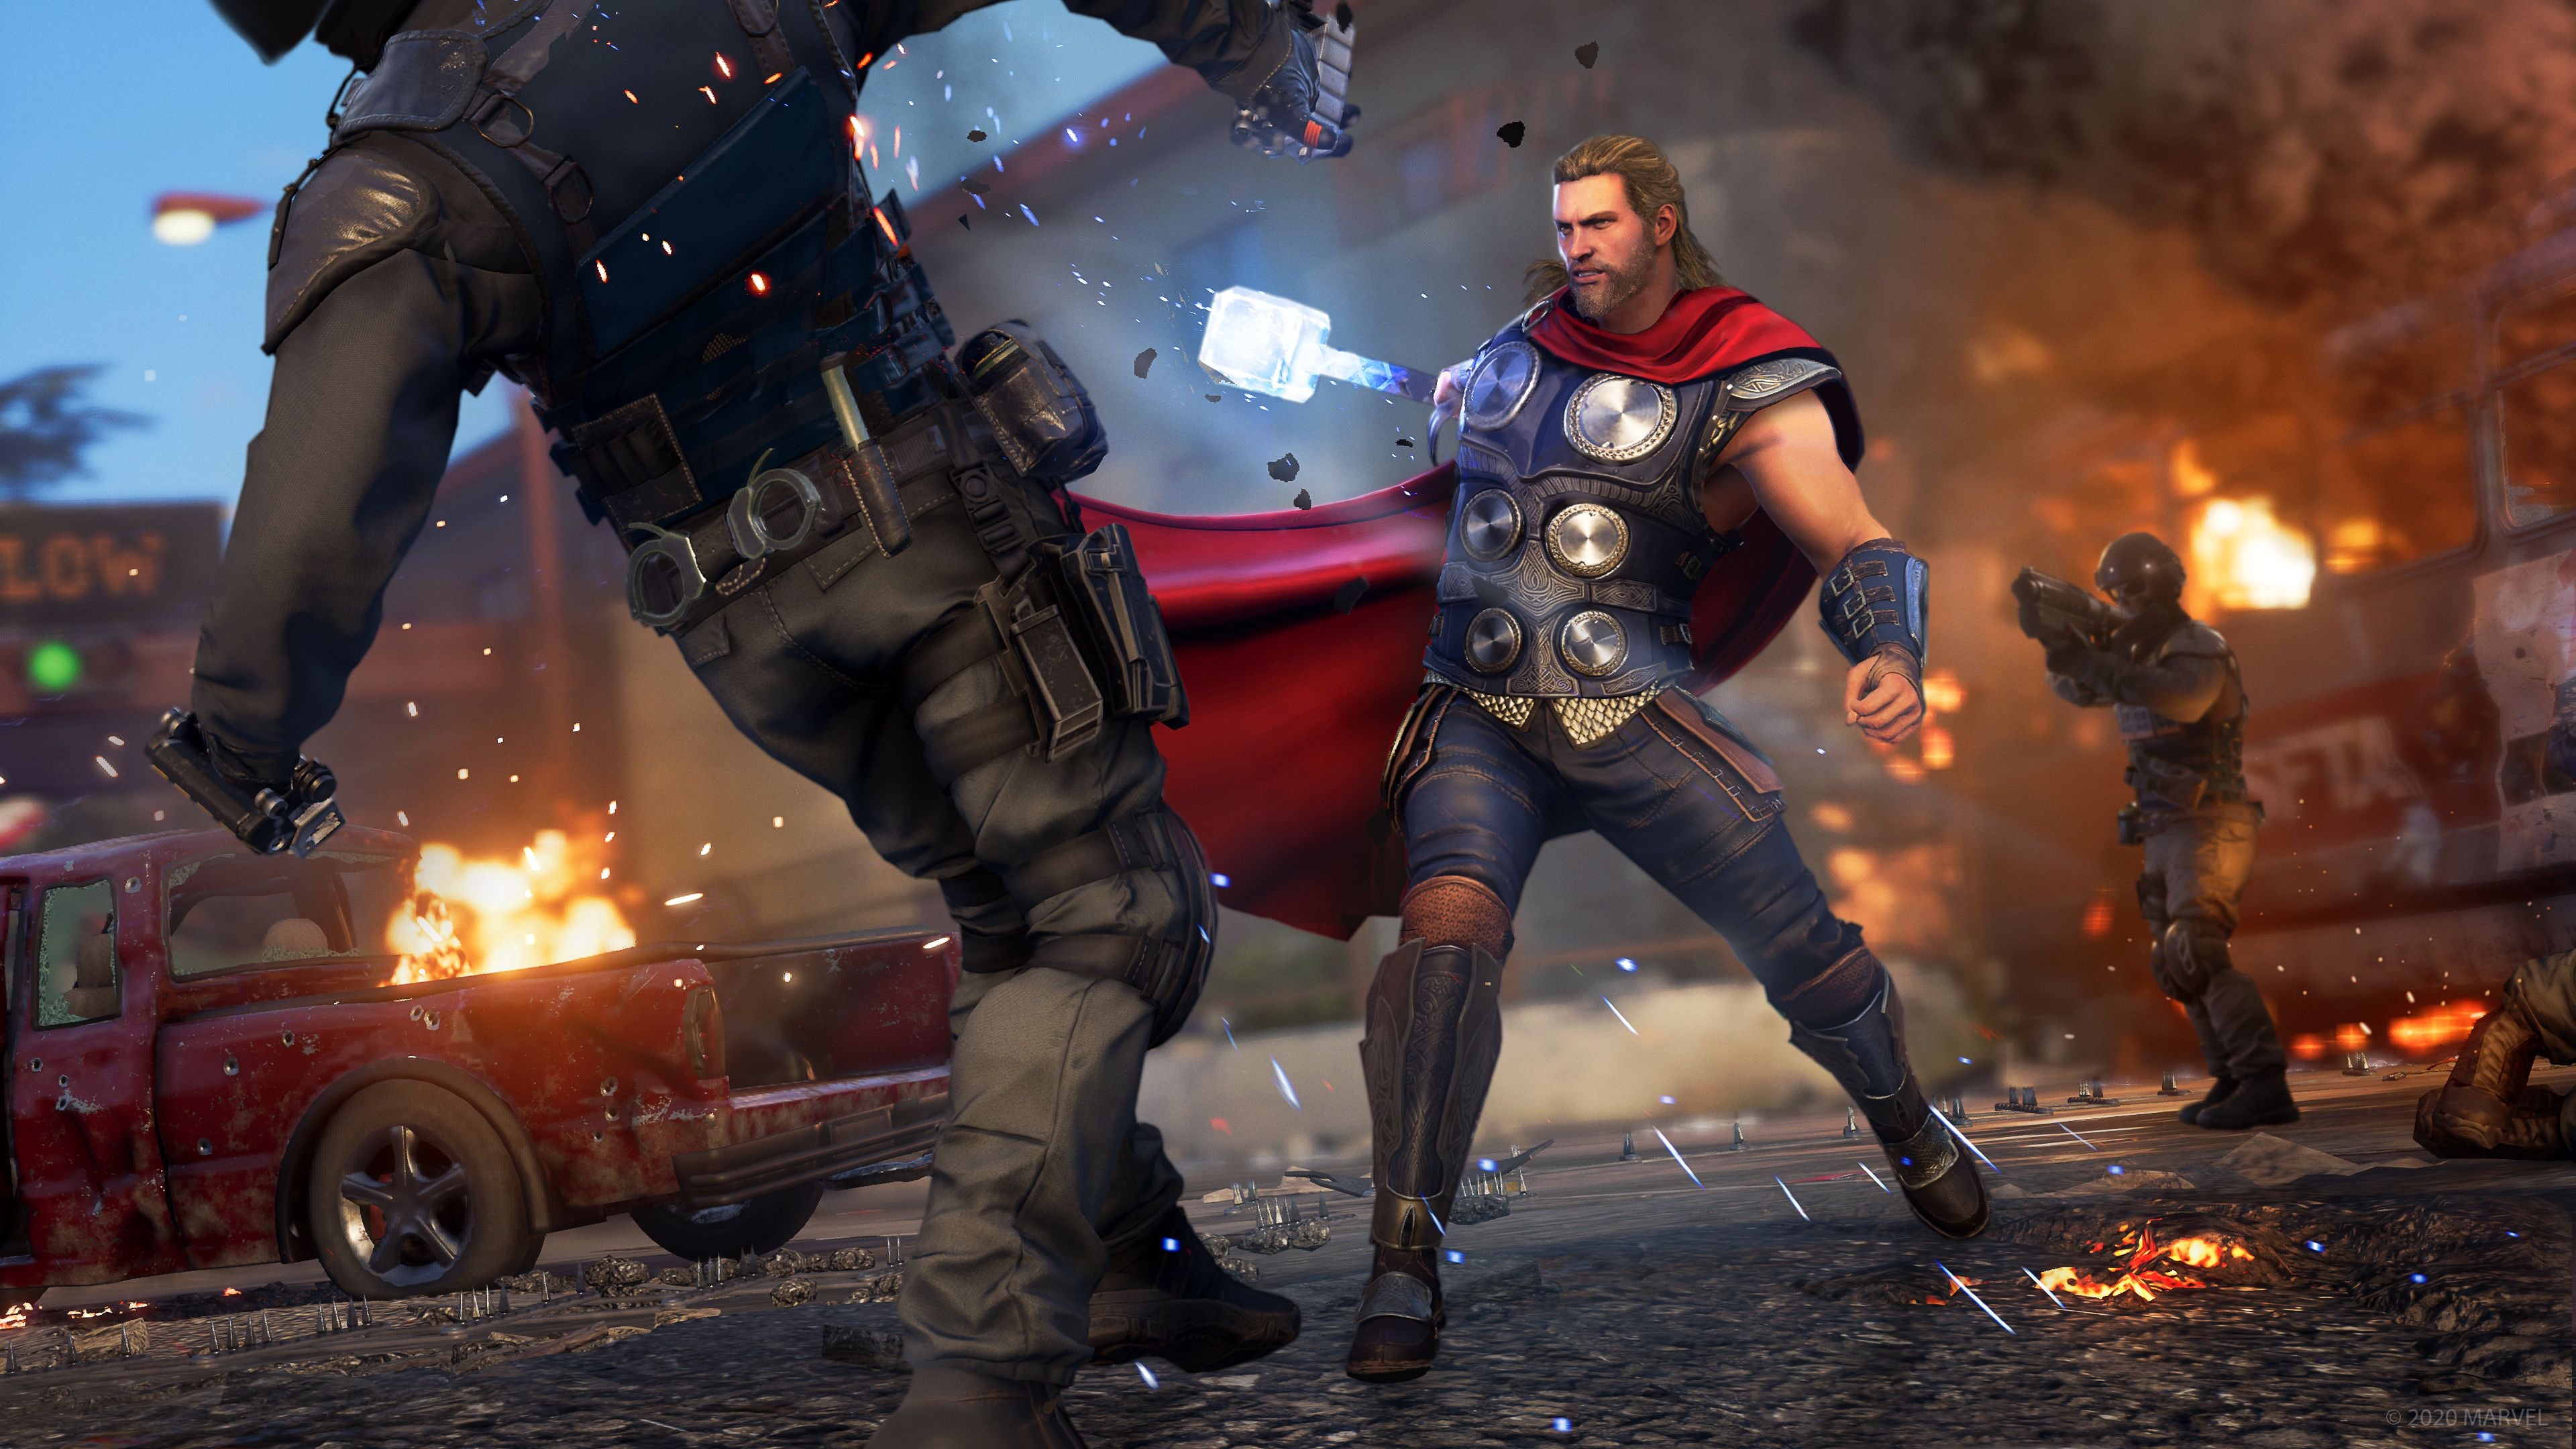 Image for Virgin Media customers get beta access to Marvel’s Avengers this weekend